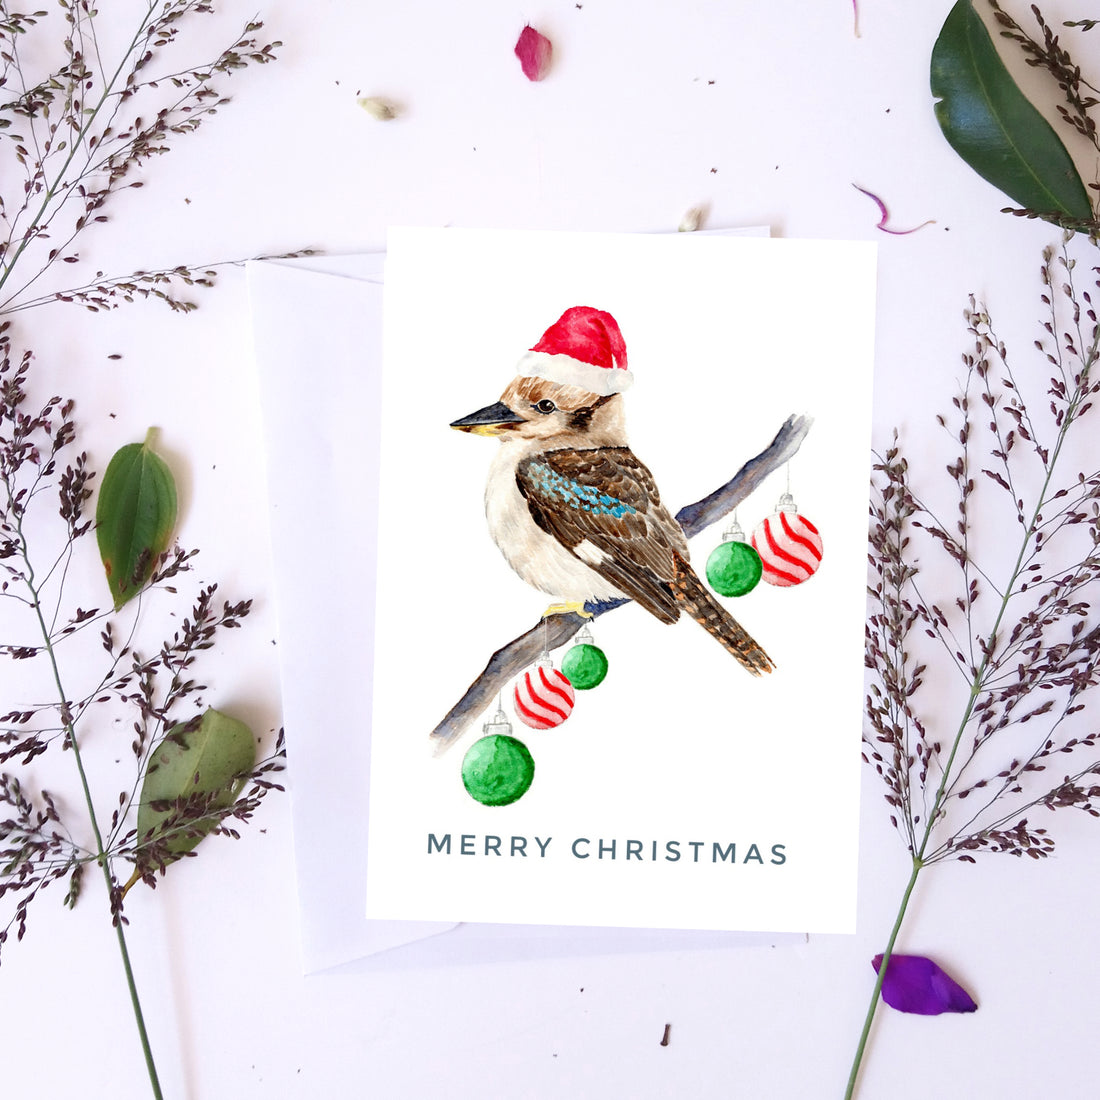 We now have 8 designs of Christmas cards